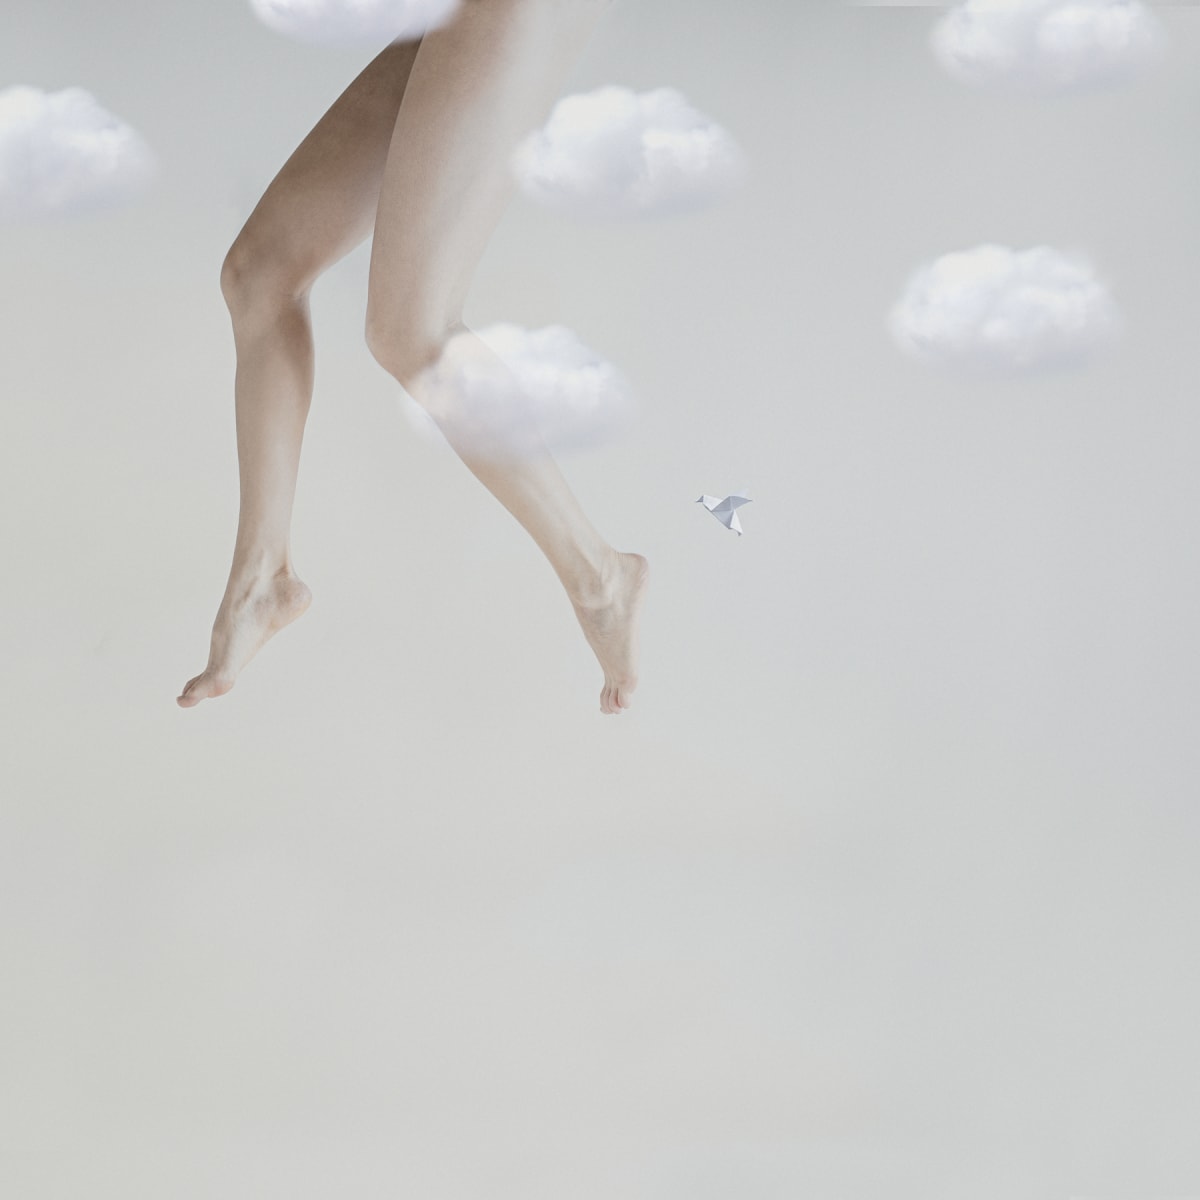 Walking In the Sky by Dasha Pears  Image: Walking in the air never seem to care. Light and free, this is how things should be.